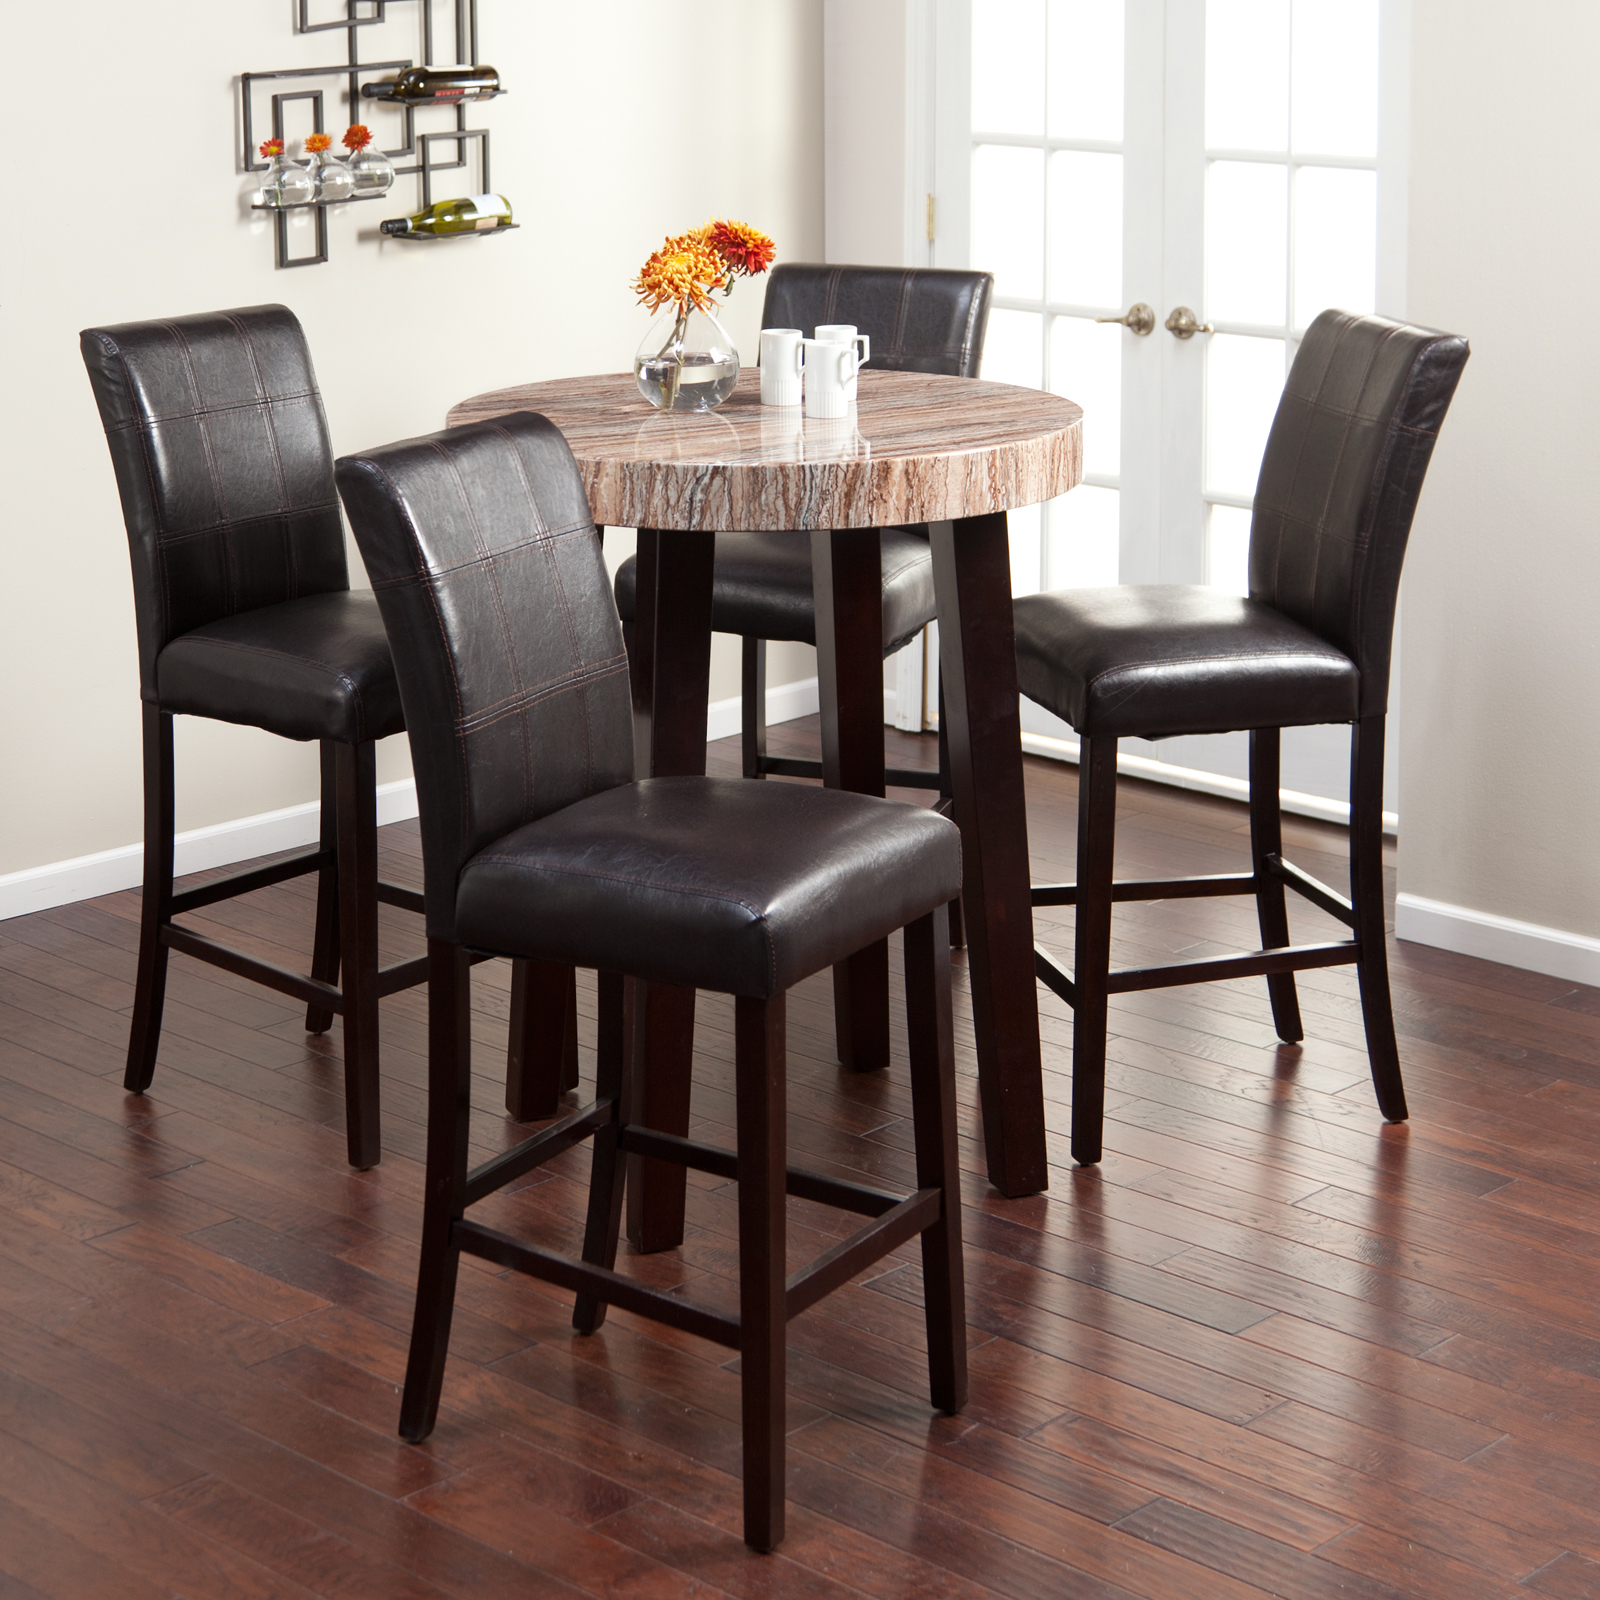 Round bar height dining table 2